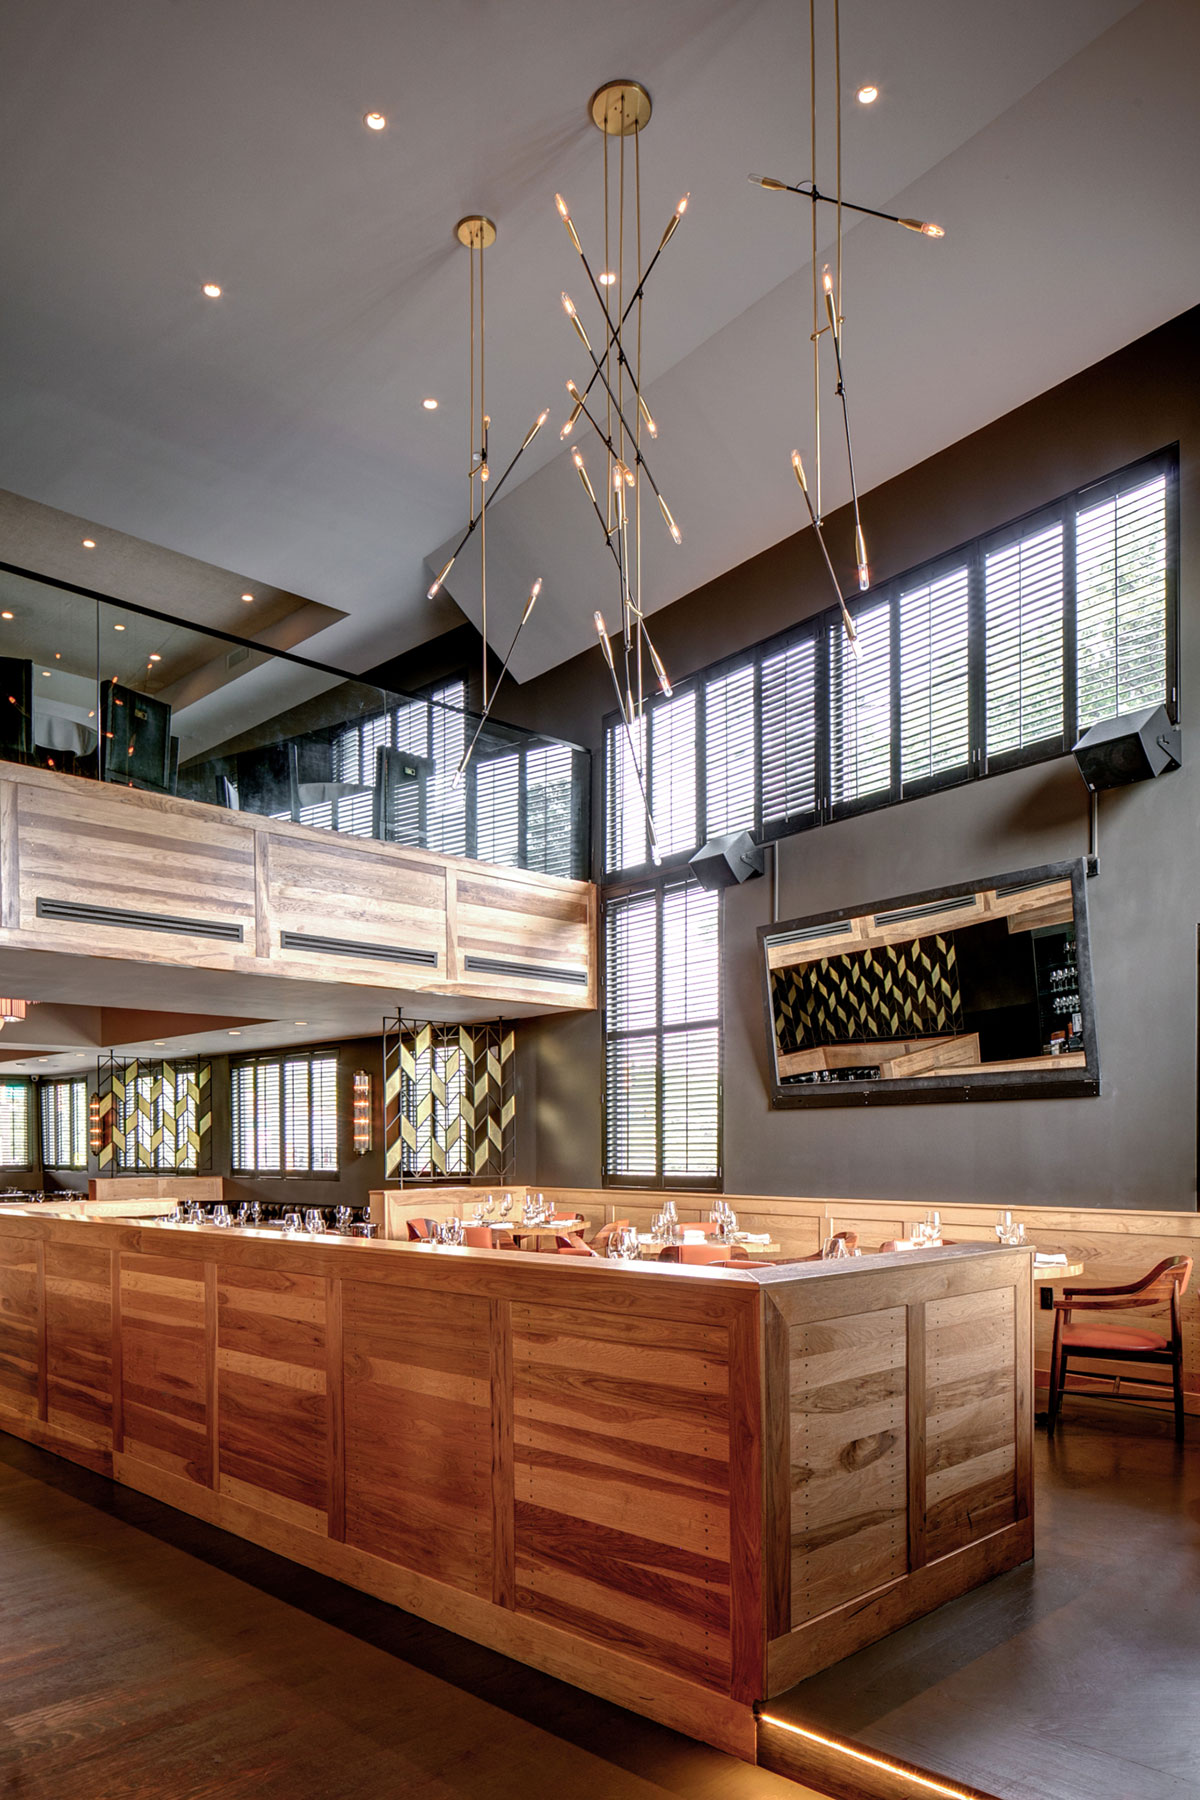 Double height dining area of the American Cut Bar & Grill project located at 495 Sylvan Avenue in Englewood Cliffs, New Jersey designed by the architecture studio Danny Forster & Architecture